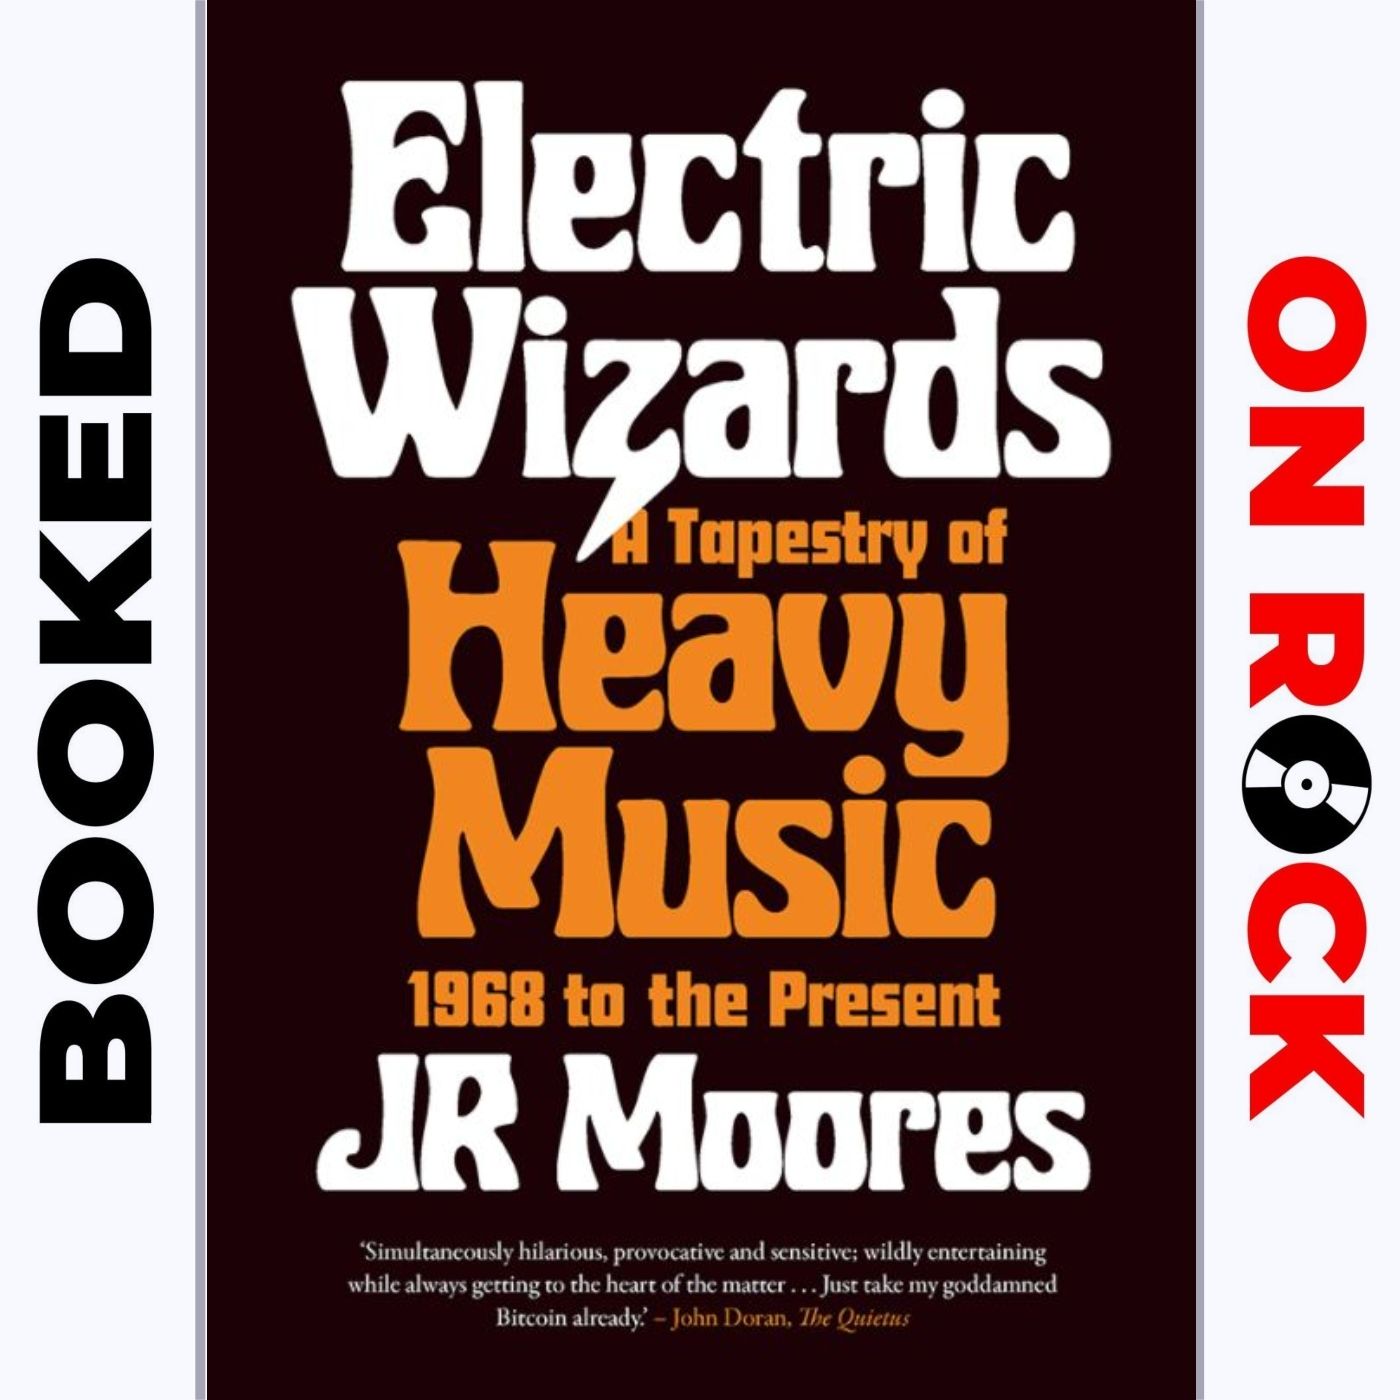 Episode 54 | J.R. Moores ["Electric Wizards: A Tapestry of Heavy Music, 1968 to the Present"]